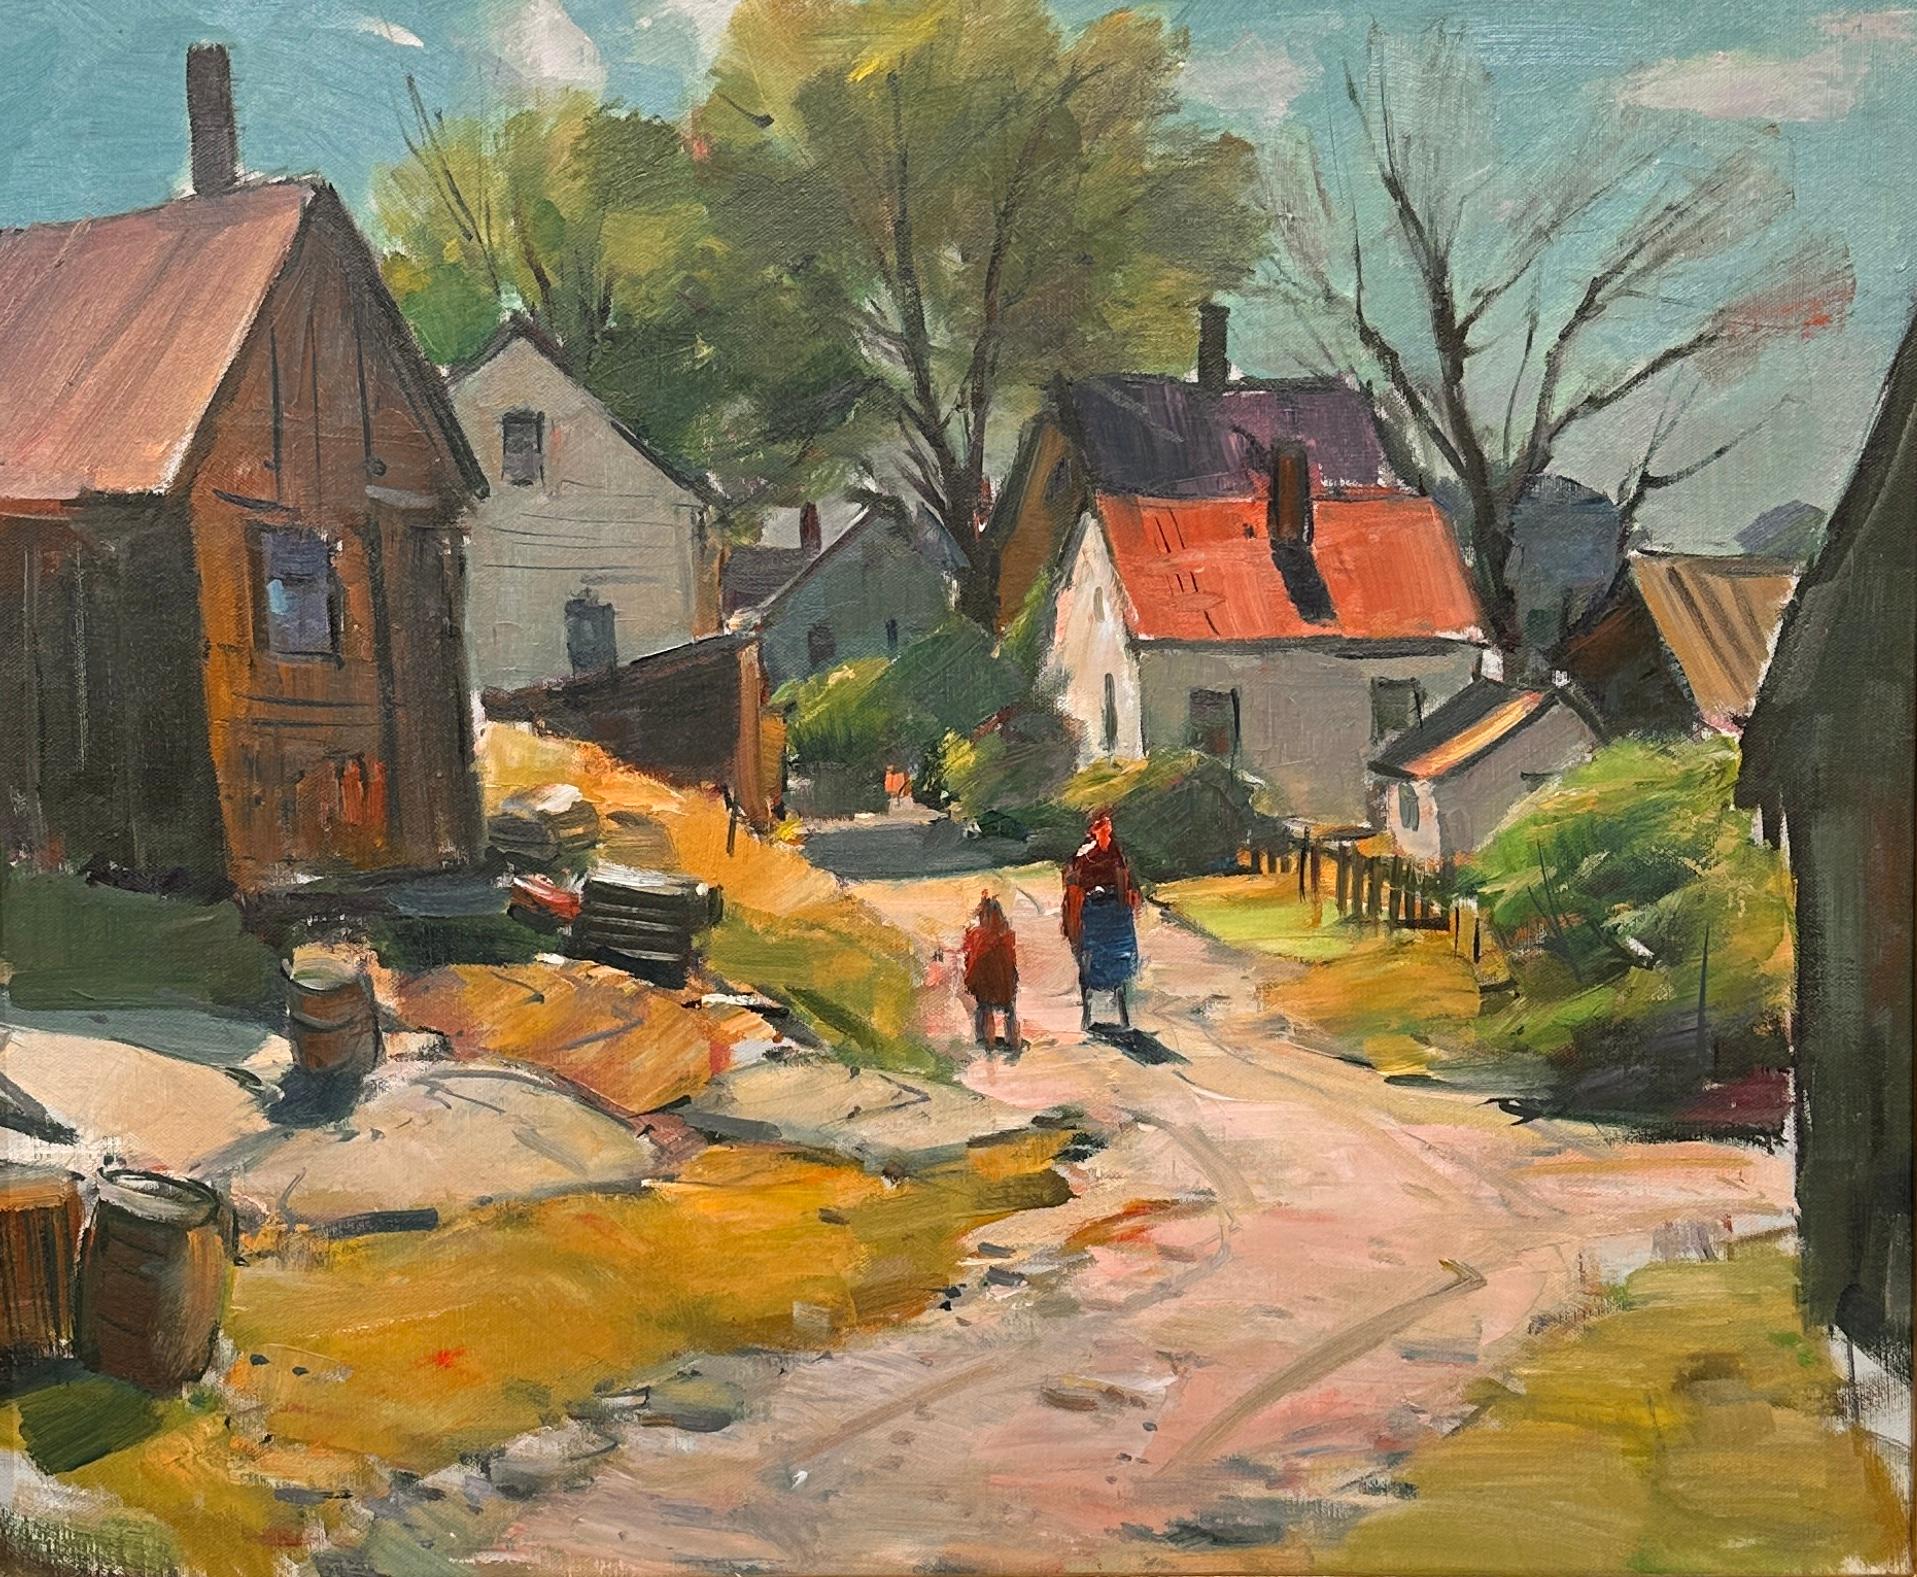 Carl Peters Landscape Painting - "Walking Past The Houses" Landscape, Figures, Cape Ann Artist, Rochester, NY